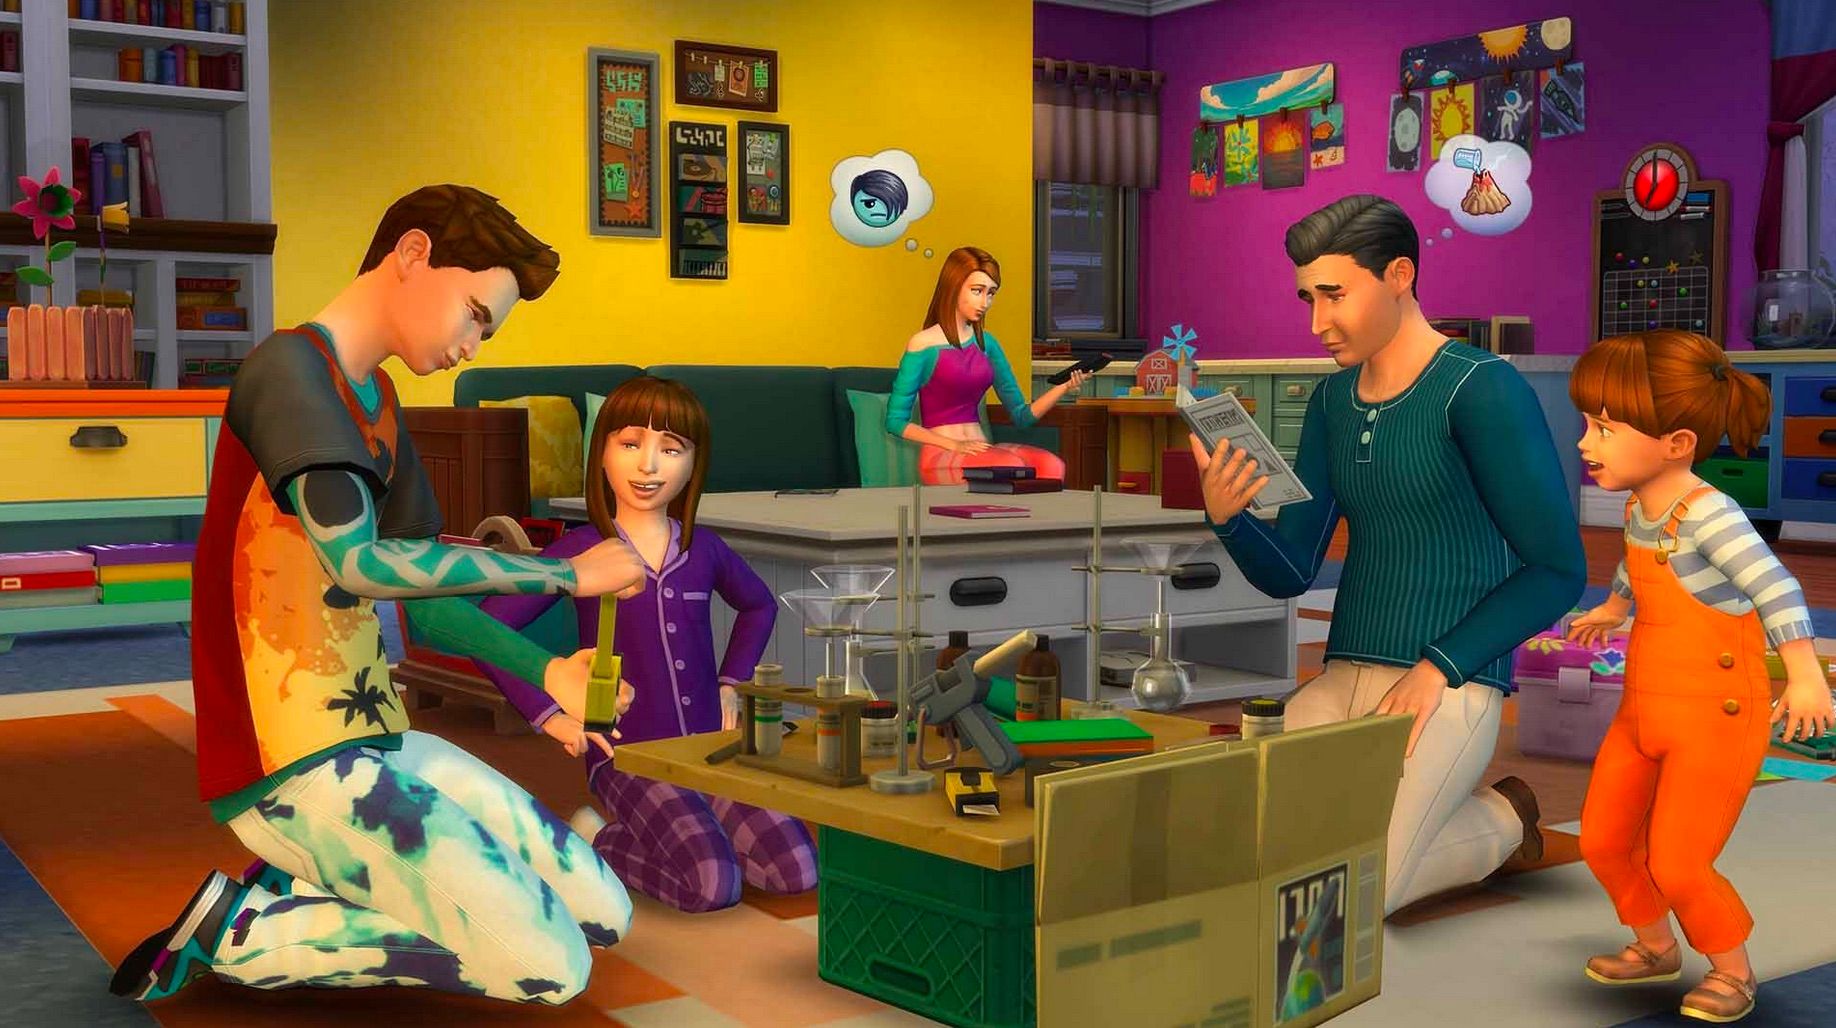 The Sims family with two males and three females